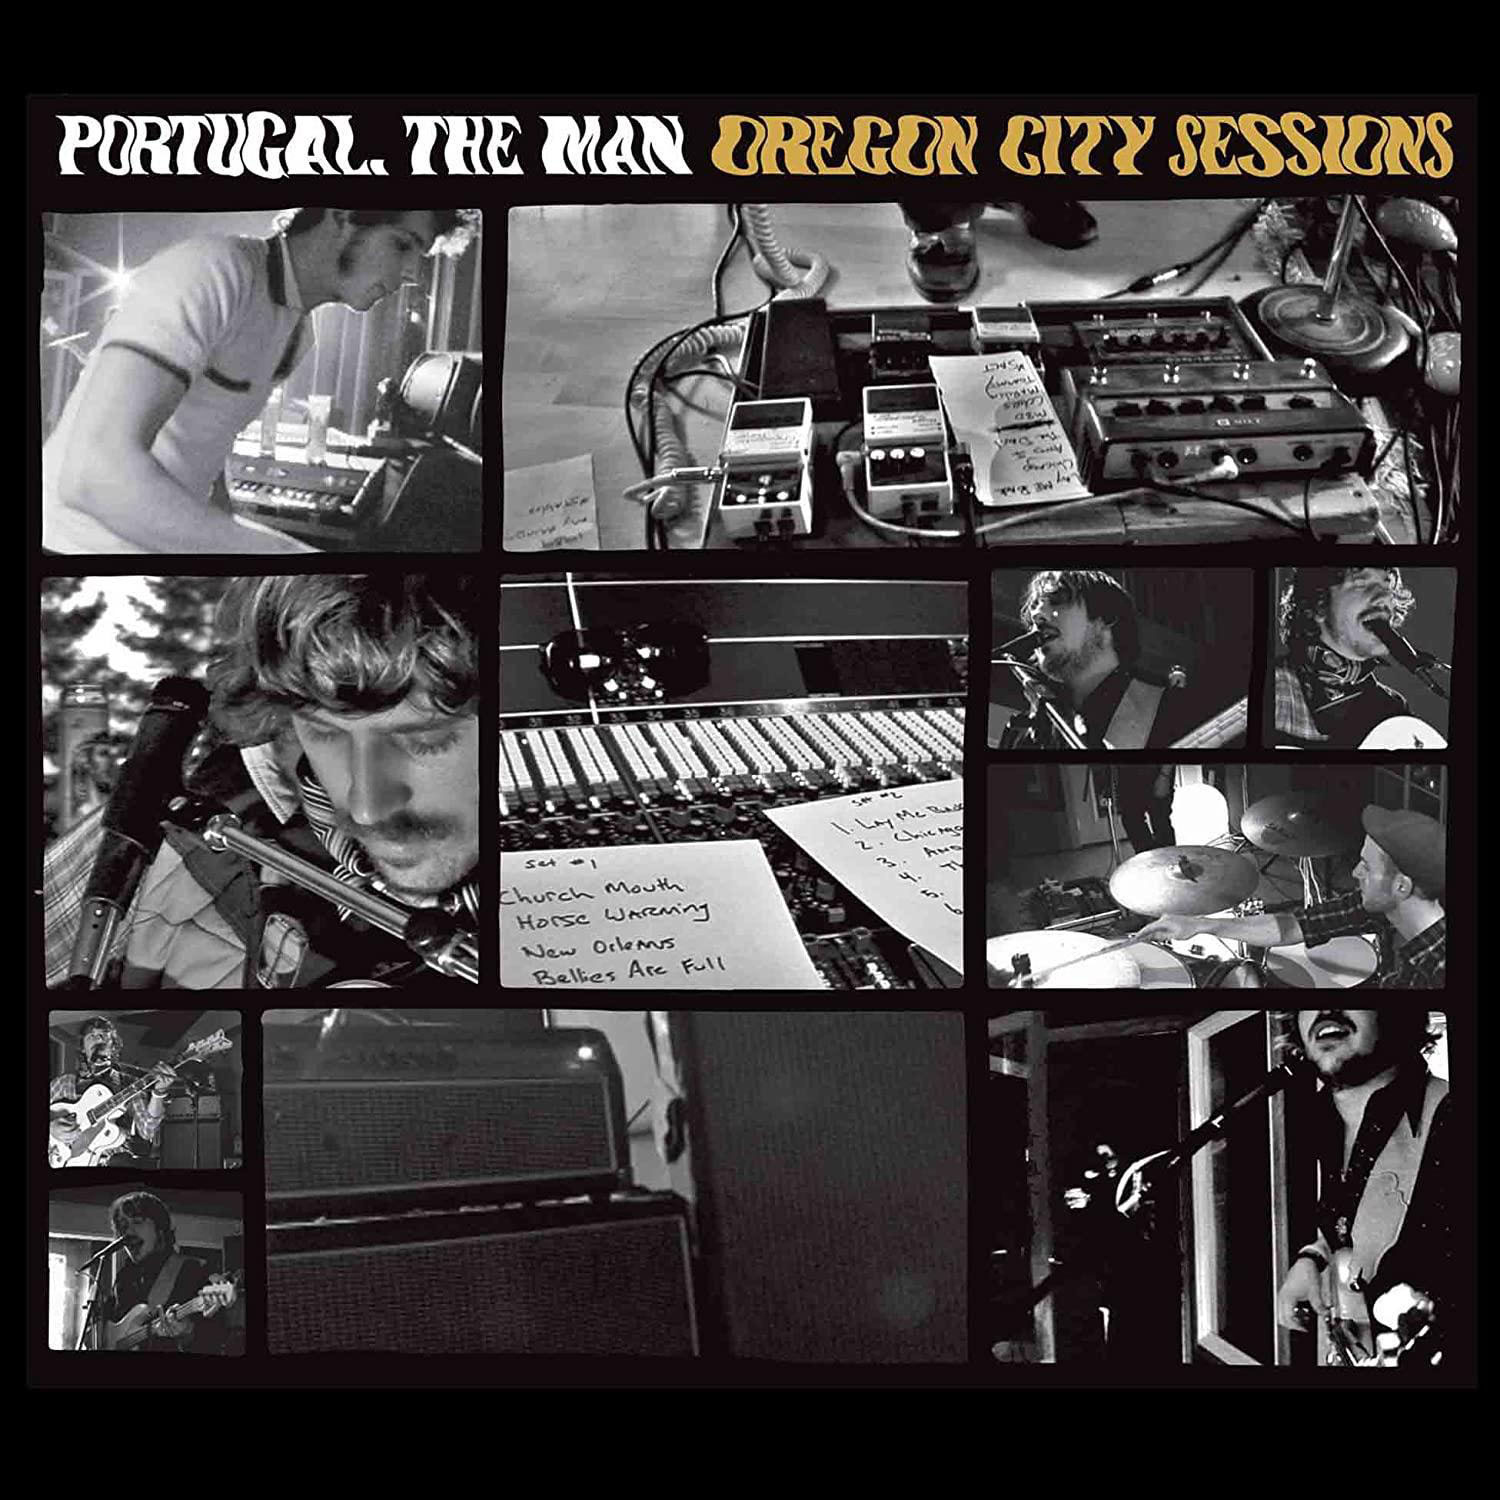 Man - The (CD) City - Oregon Portugal. Sessions